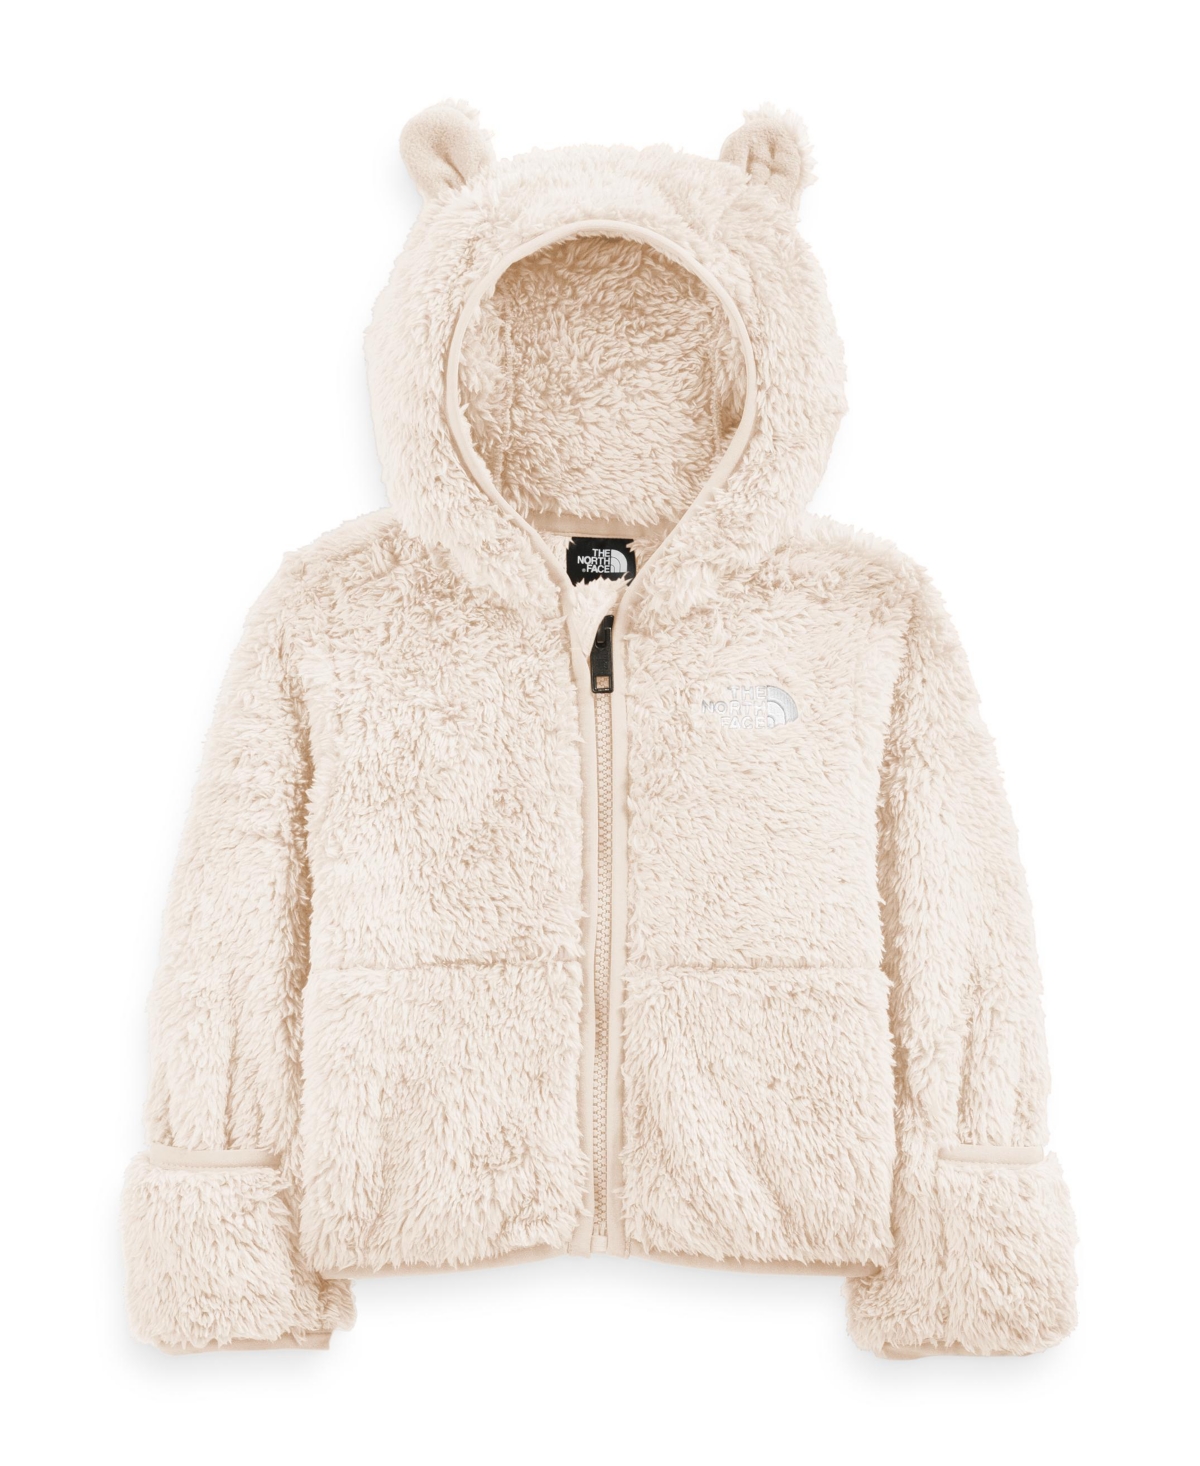 The North Face Unisex Color Blocked Faux Fur Baby Bear Hoodie - Baby In Gardenia White